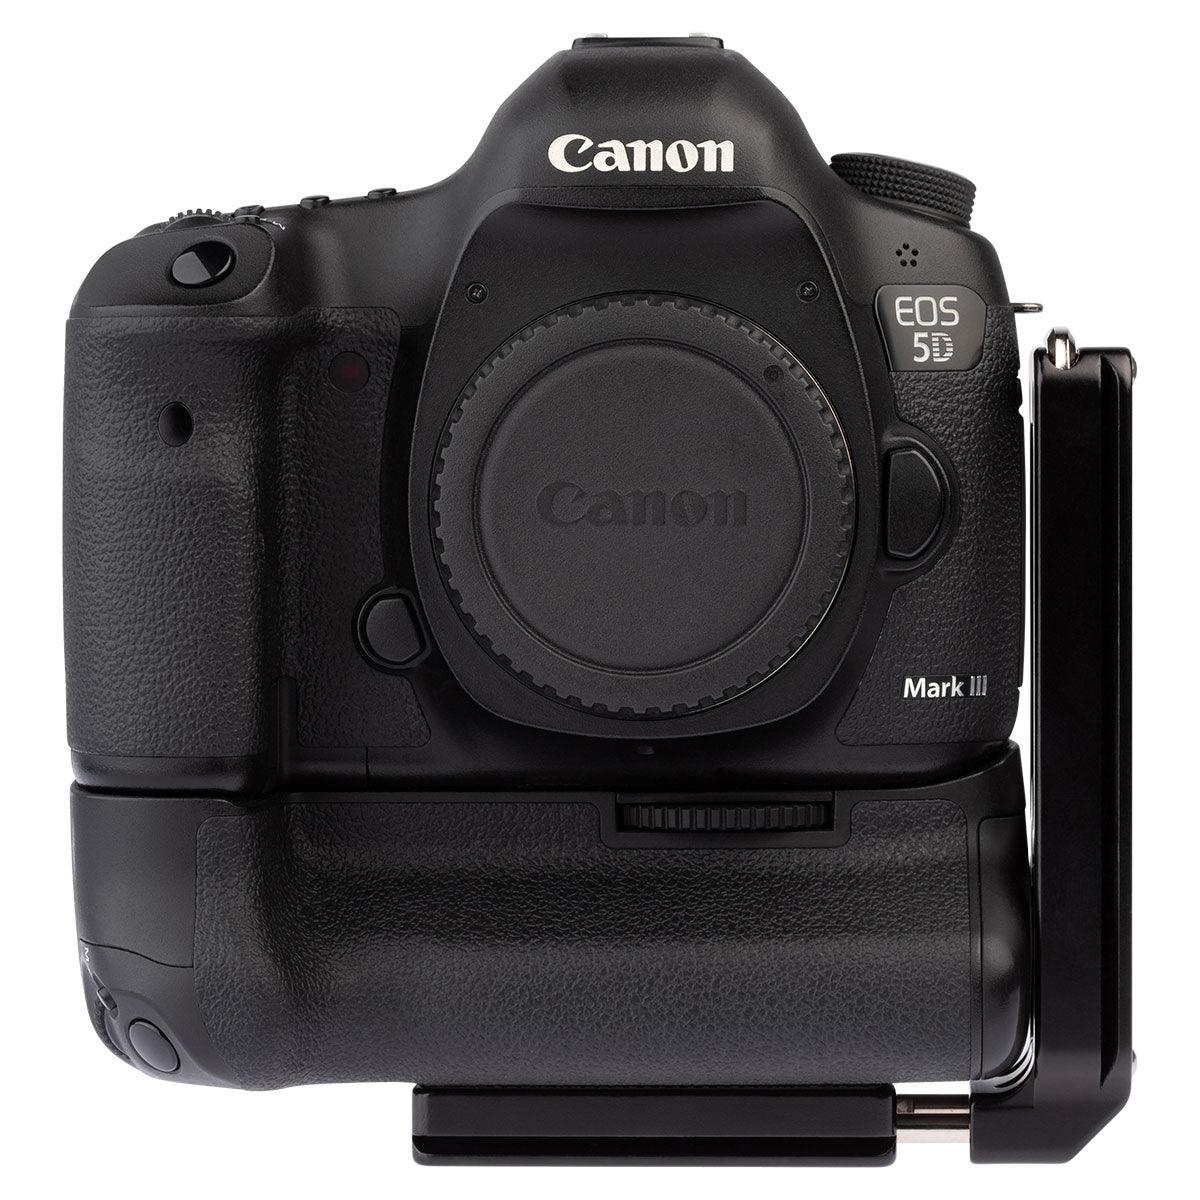 Mounted to Canon 5D Mark III with BG-E11 Battery Grip